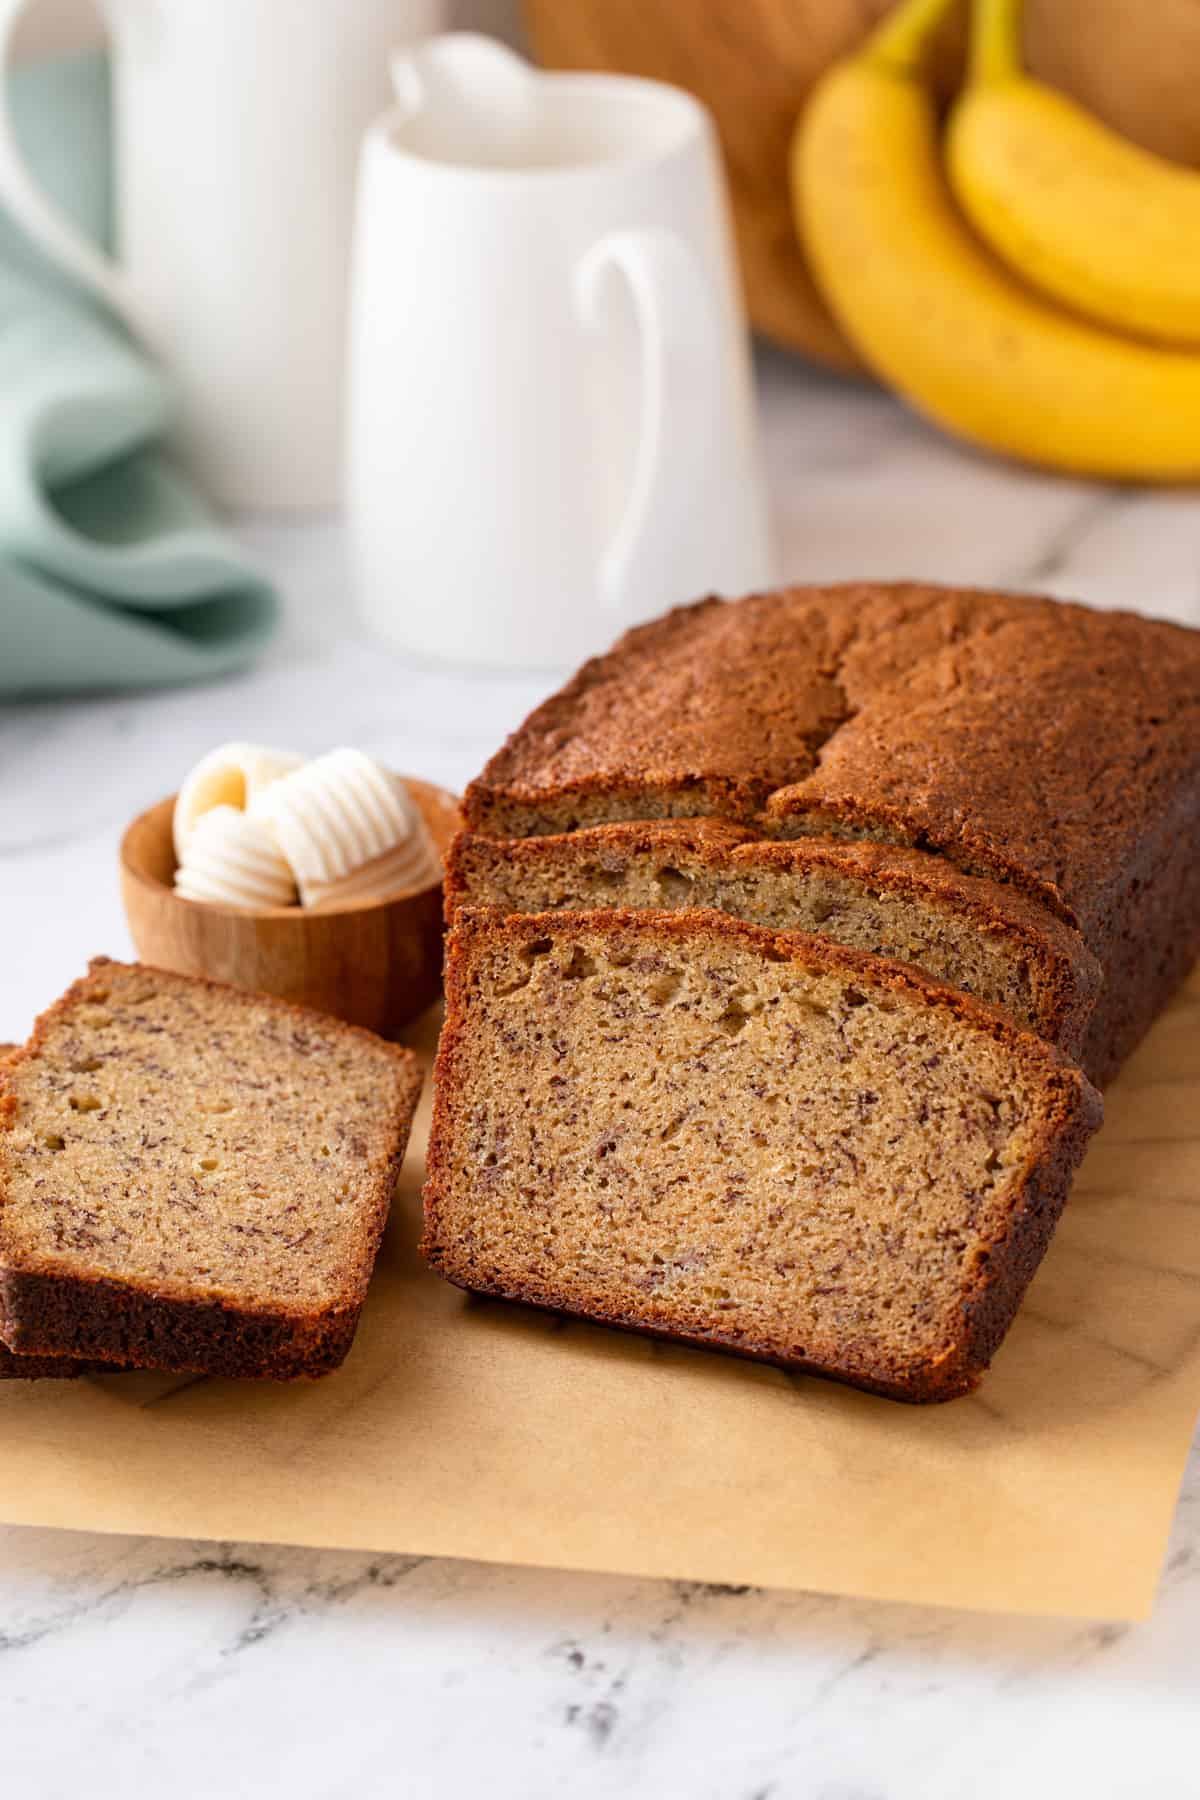 Loaf of dominique ansel's banana bread cut into slices.